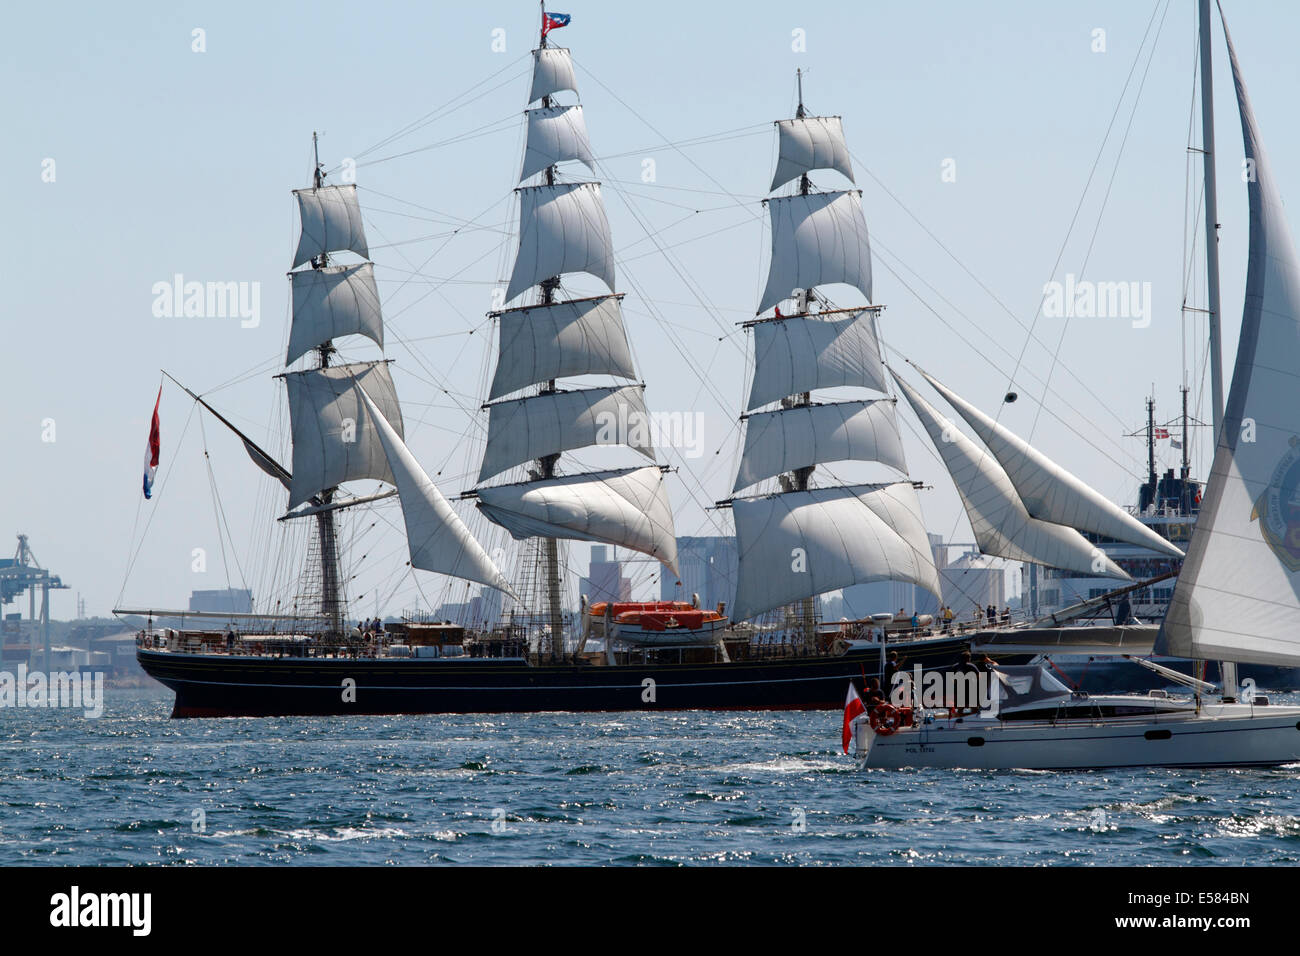 STAD AMSTERDAM, a Dutch three-masted clipper, passing Kronborg at Elsinore in the Sound, Øresund, between Denmark and Sweden. Stock Photo